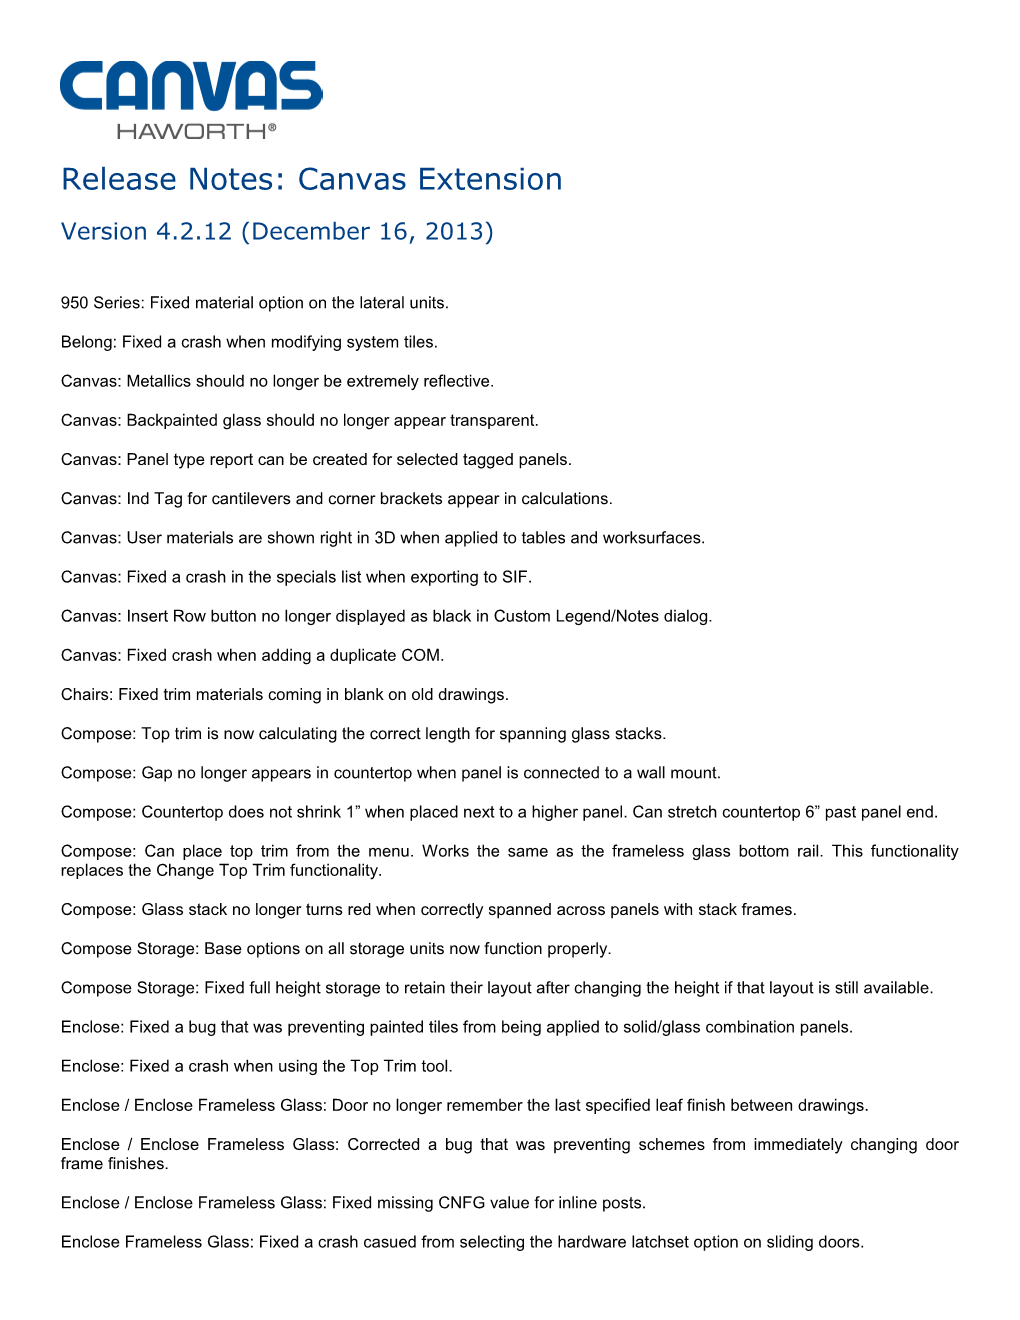 Release Notes Haworth Canvas s1